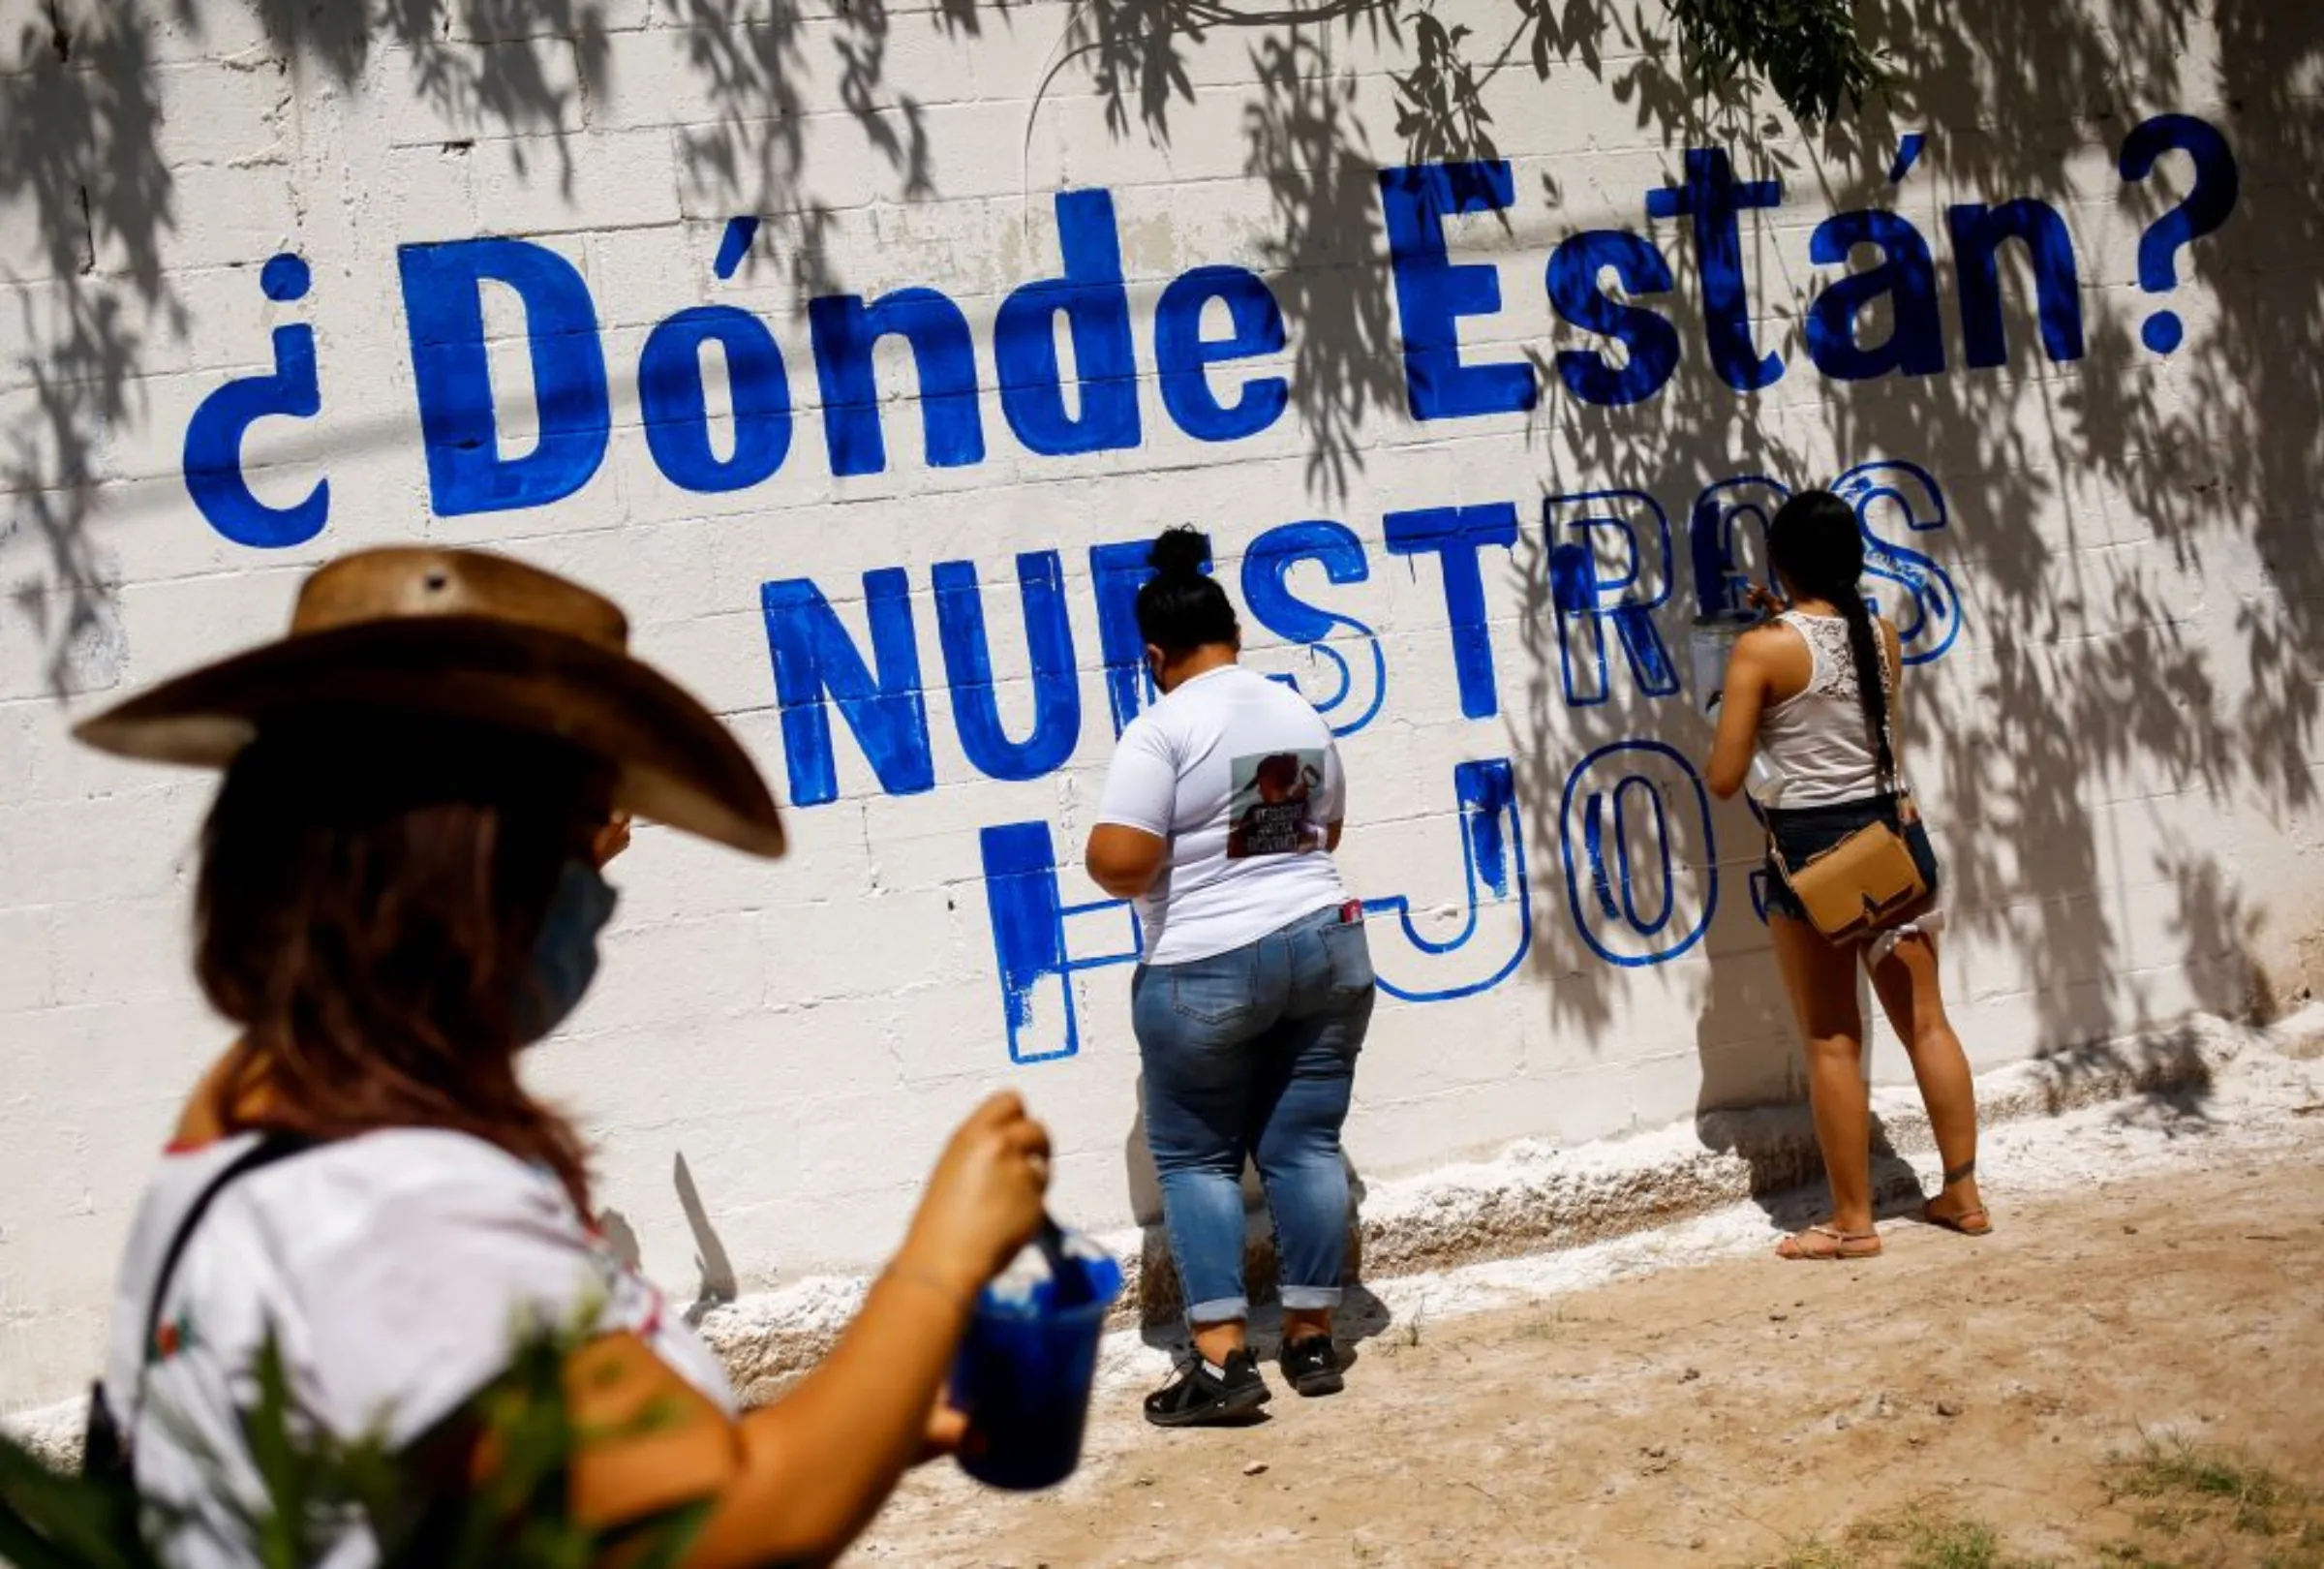 Relatives of missing persons and activists paint a mural that reads: 'Where are they? Our children', during a memorial to mark the International Day of the Victims of Enforced Disappearances in Ciudad Juarez, Mexico August 29, 2021